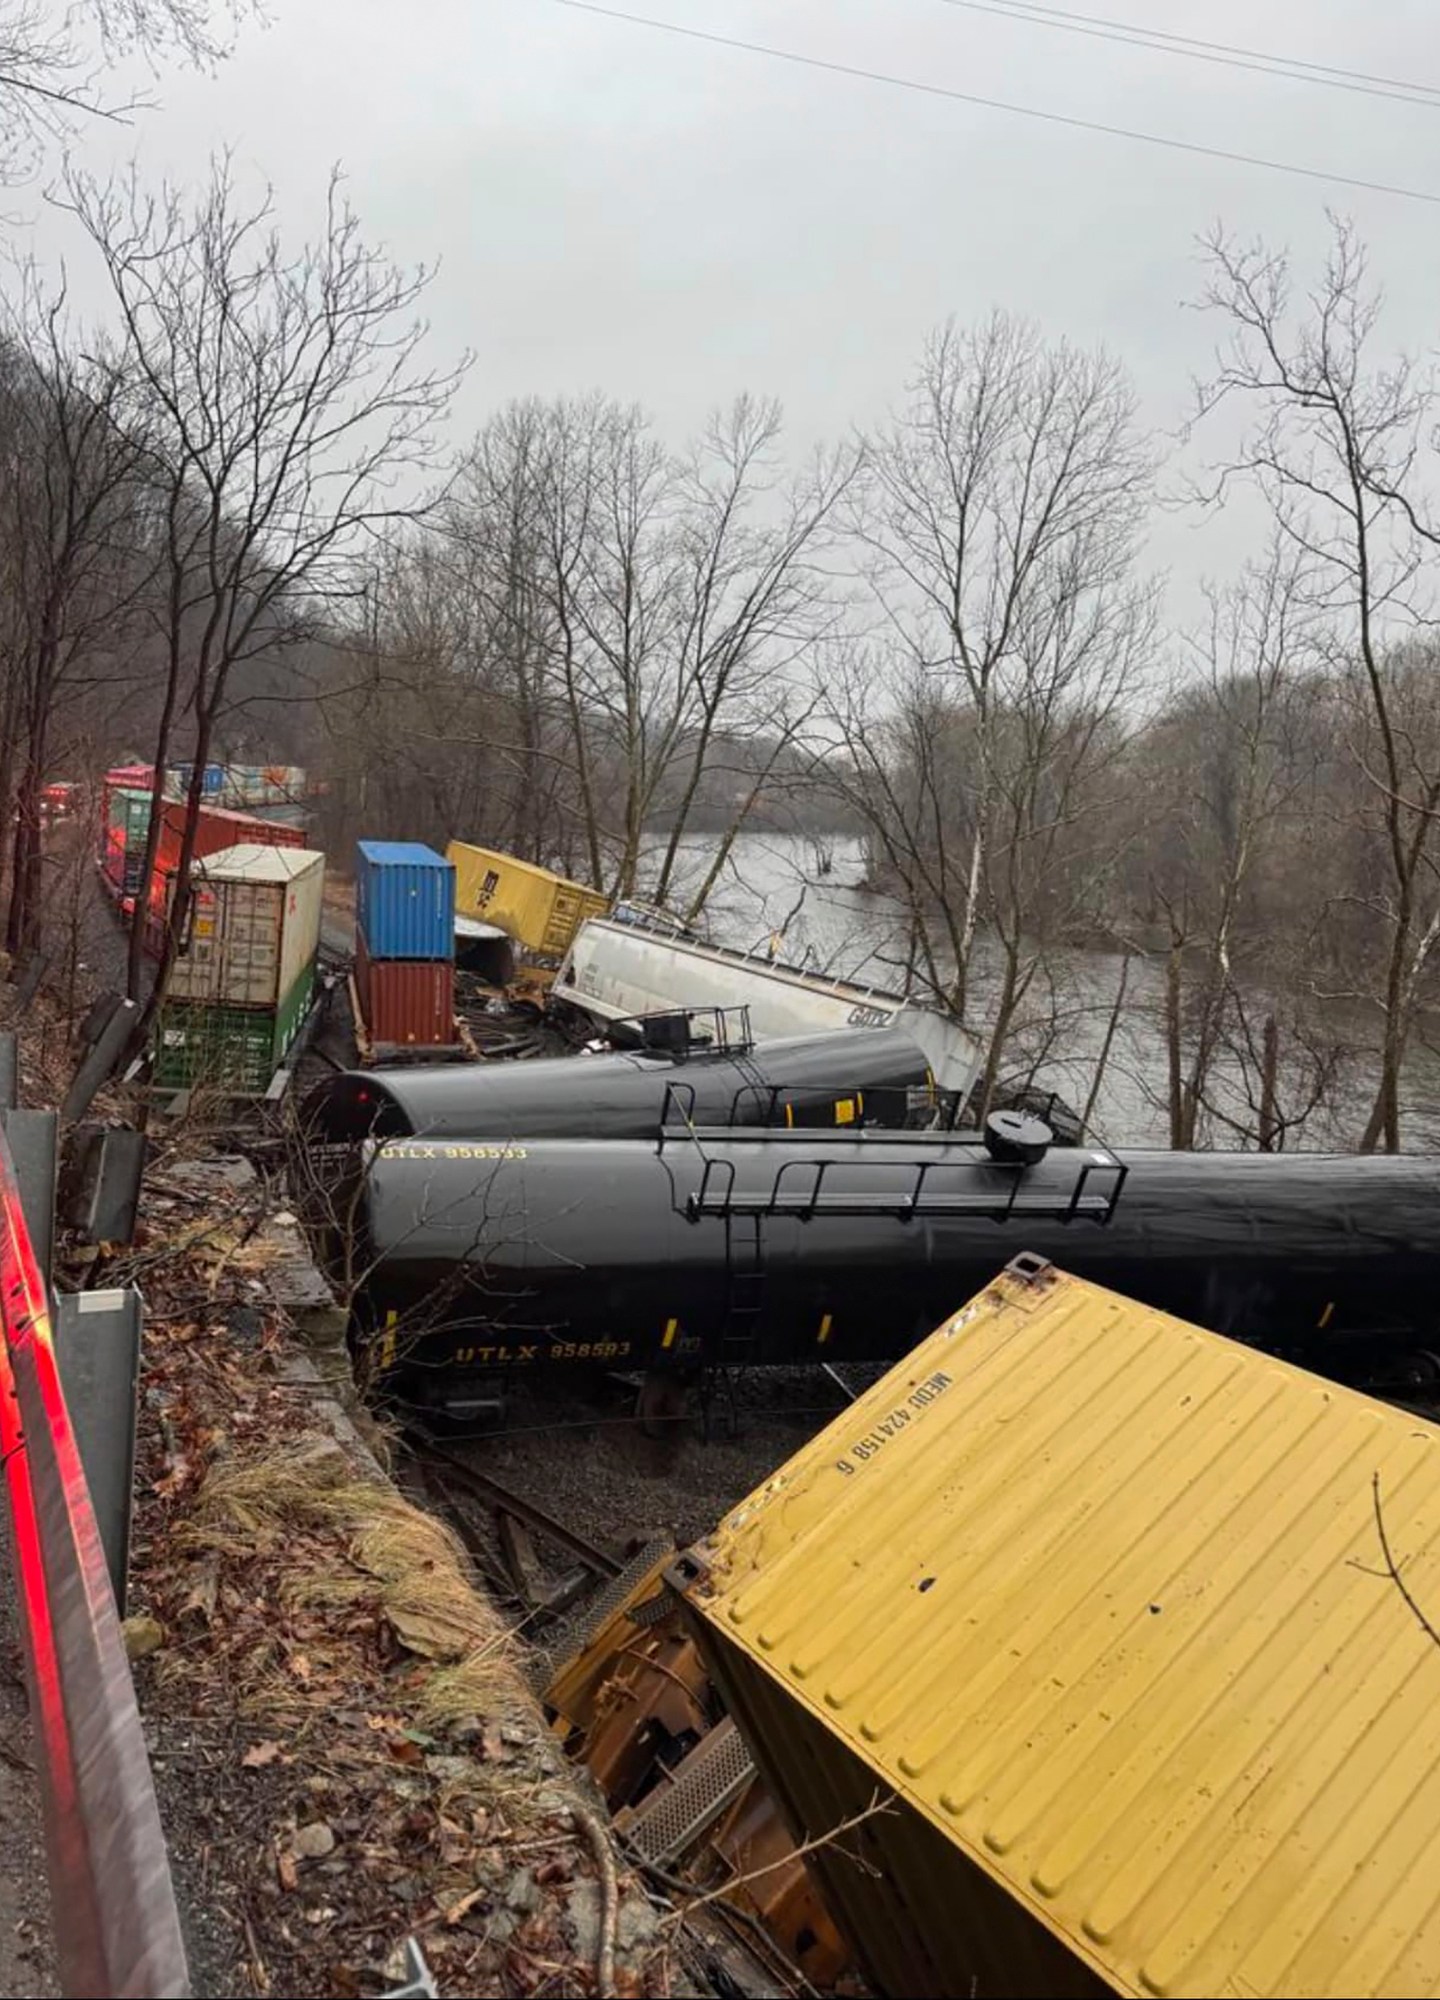 FILE - This photo provided by Nancy Run Fire Company shows a train derailment along a riverbank in Saucon Township, Pa., March 2, 2024. The collision highlights the shortcomings of the automated braking system that was created to prevent such crashes. None of the circumstances the National Transportation Safety Board described Tuesday, March 26, in its preliminary report on the derailment would have triggered the automated positive train control system to stop the trains. (Nancy Run Fire Company via AP, File)